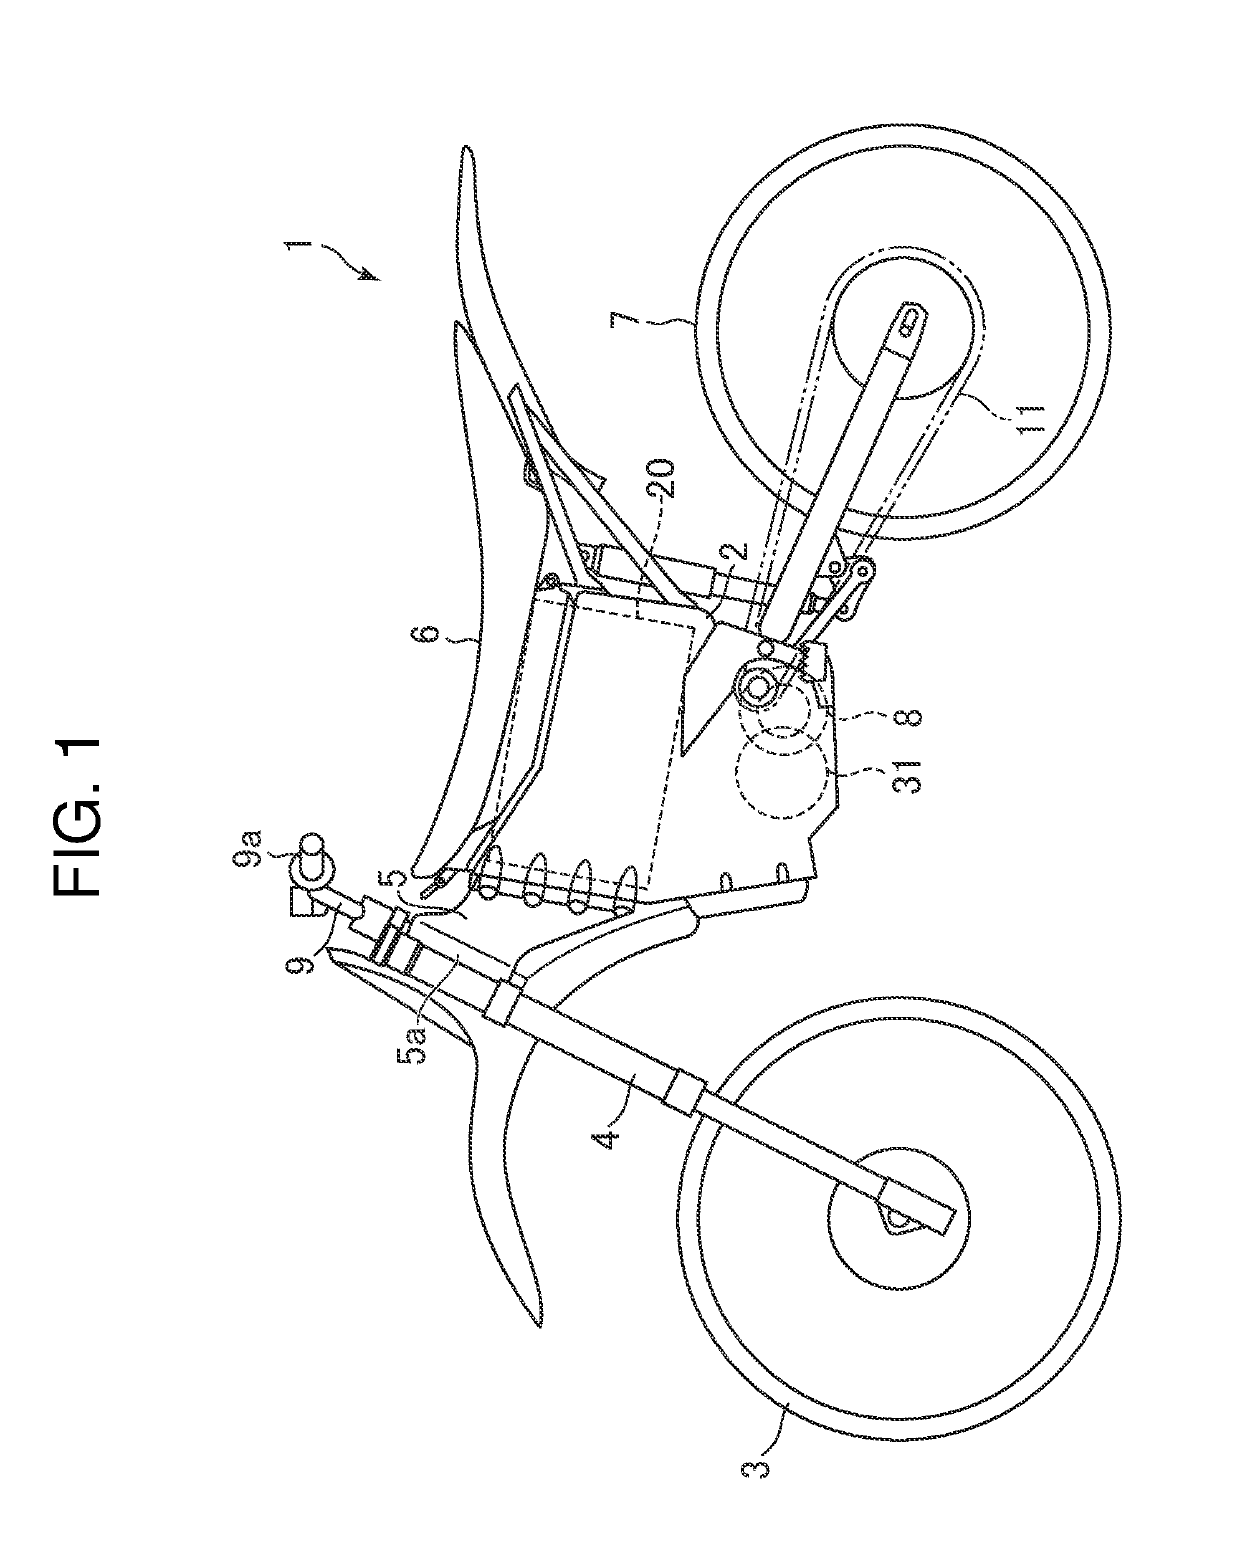 Straddled electric vehicle, and charging system for straddled electric vehicle